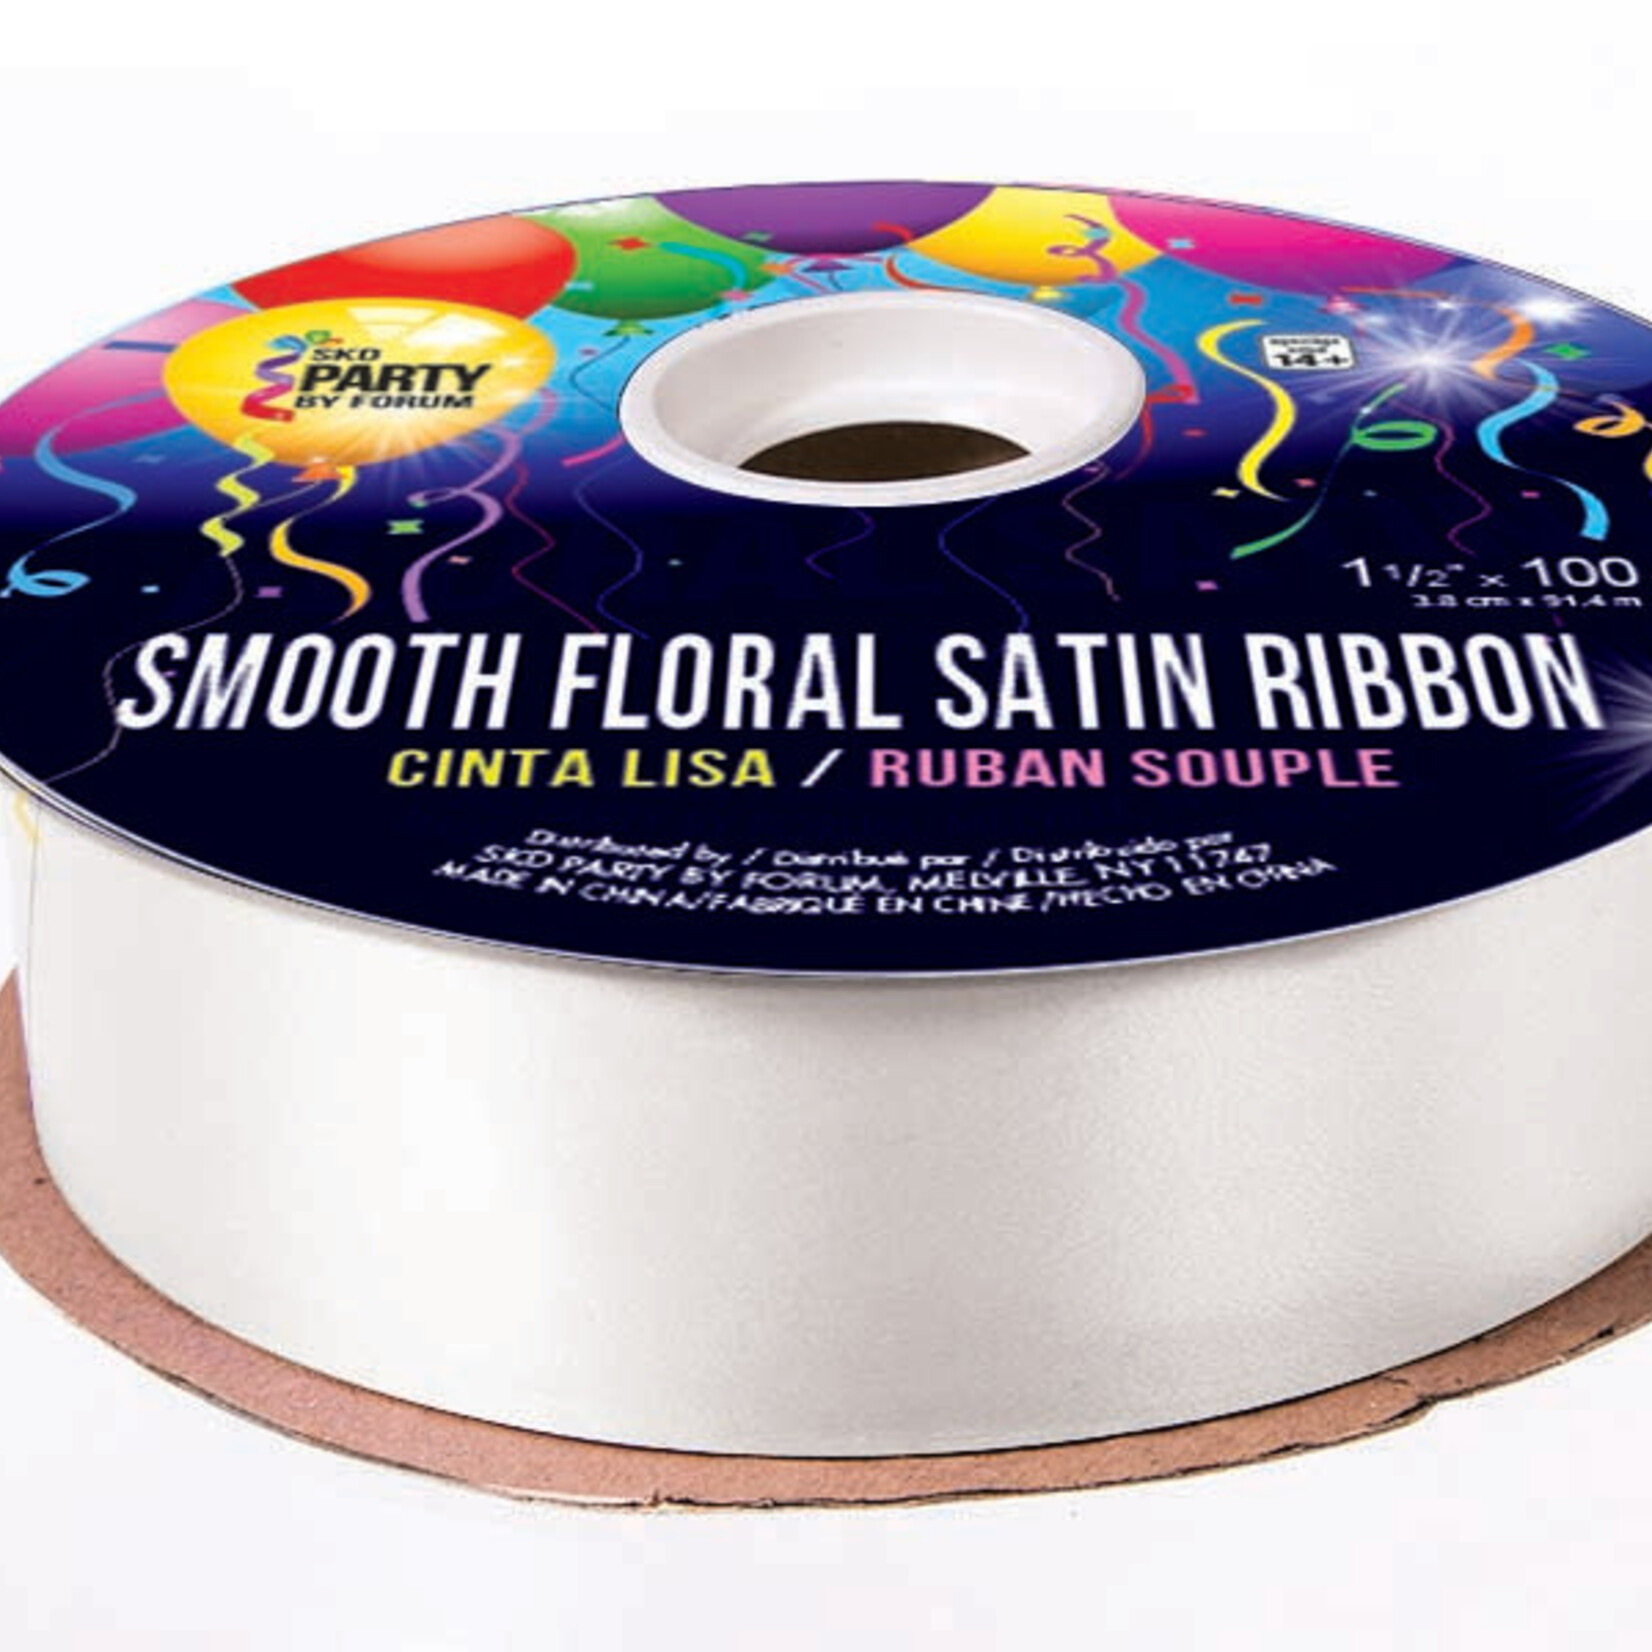 Smooth Floral Satin Ribbon 1 1/2 inches